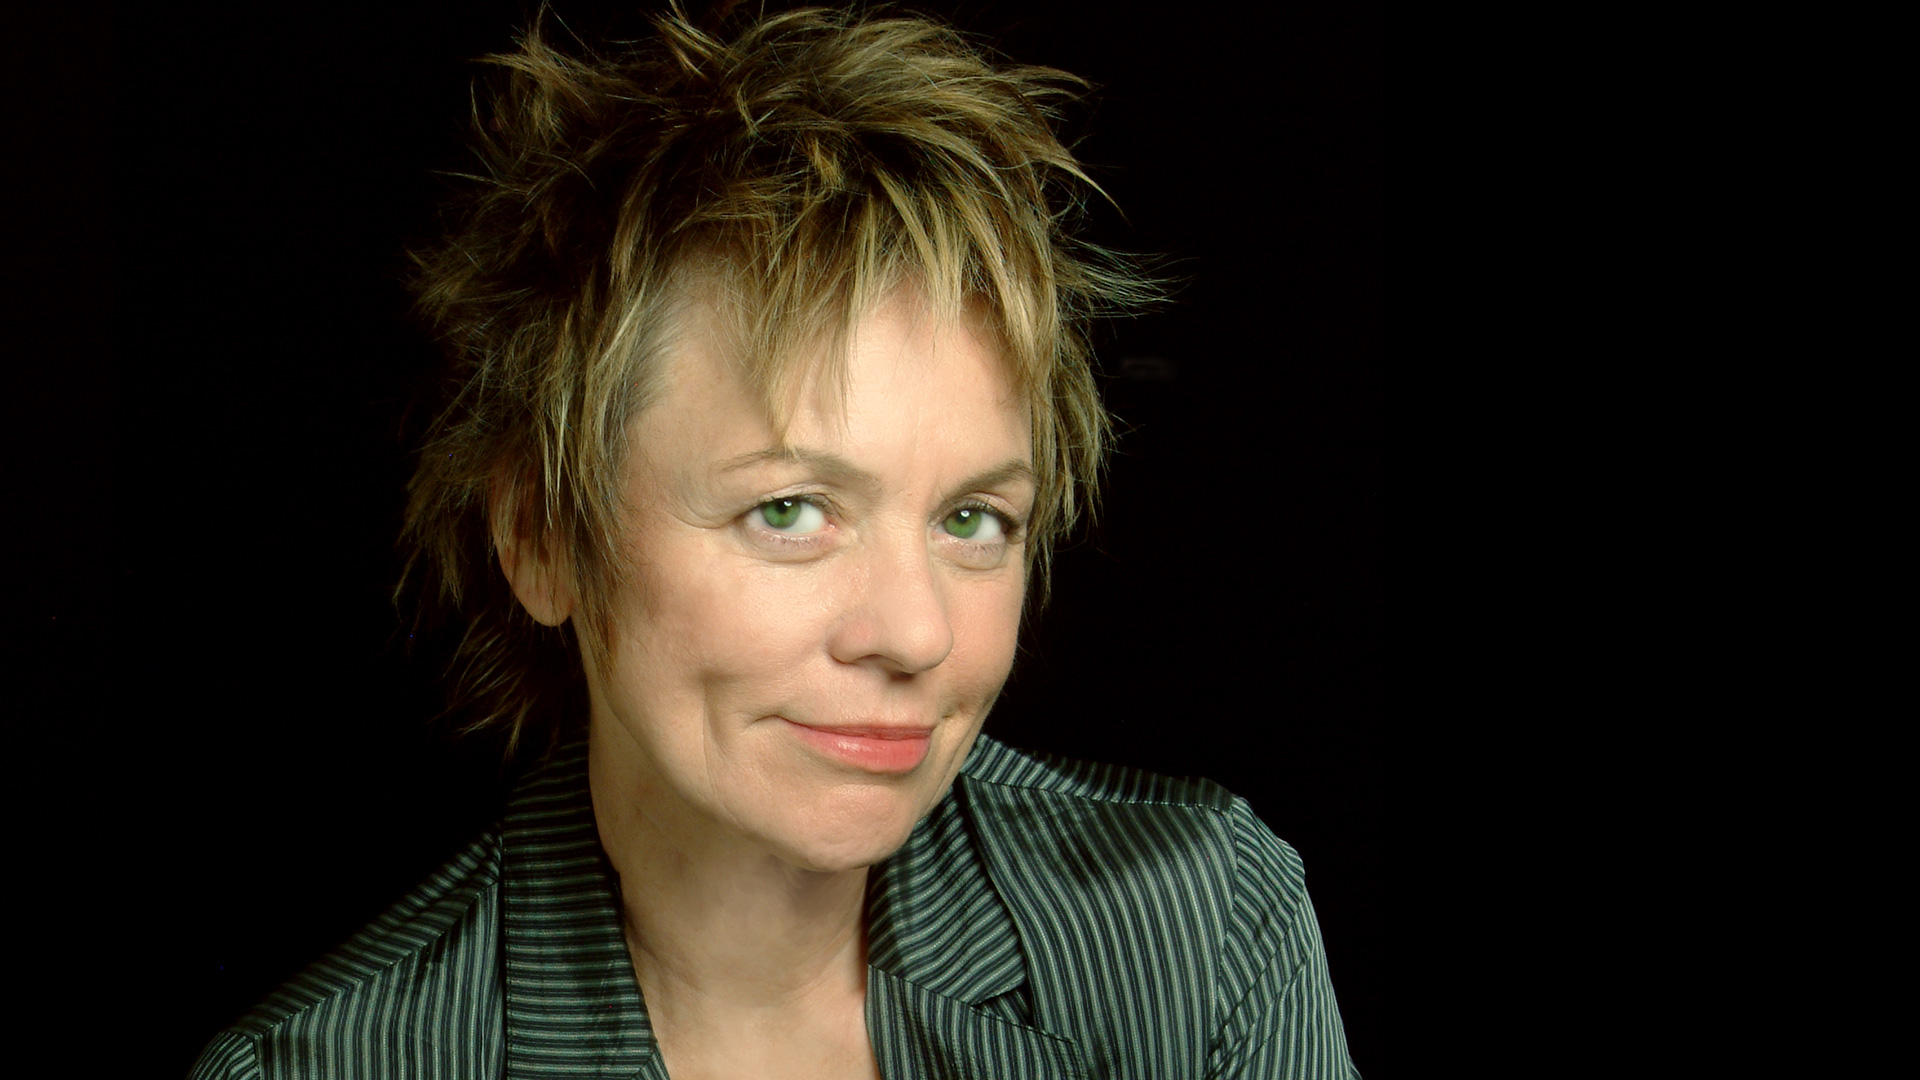 The Rotowhirl av Laurie Anderson